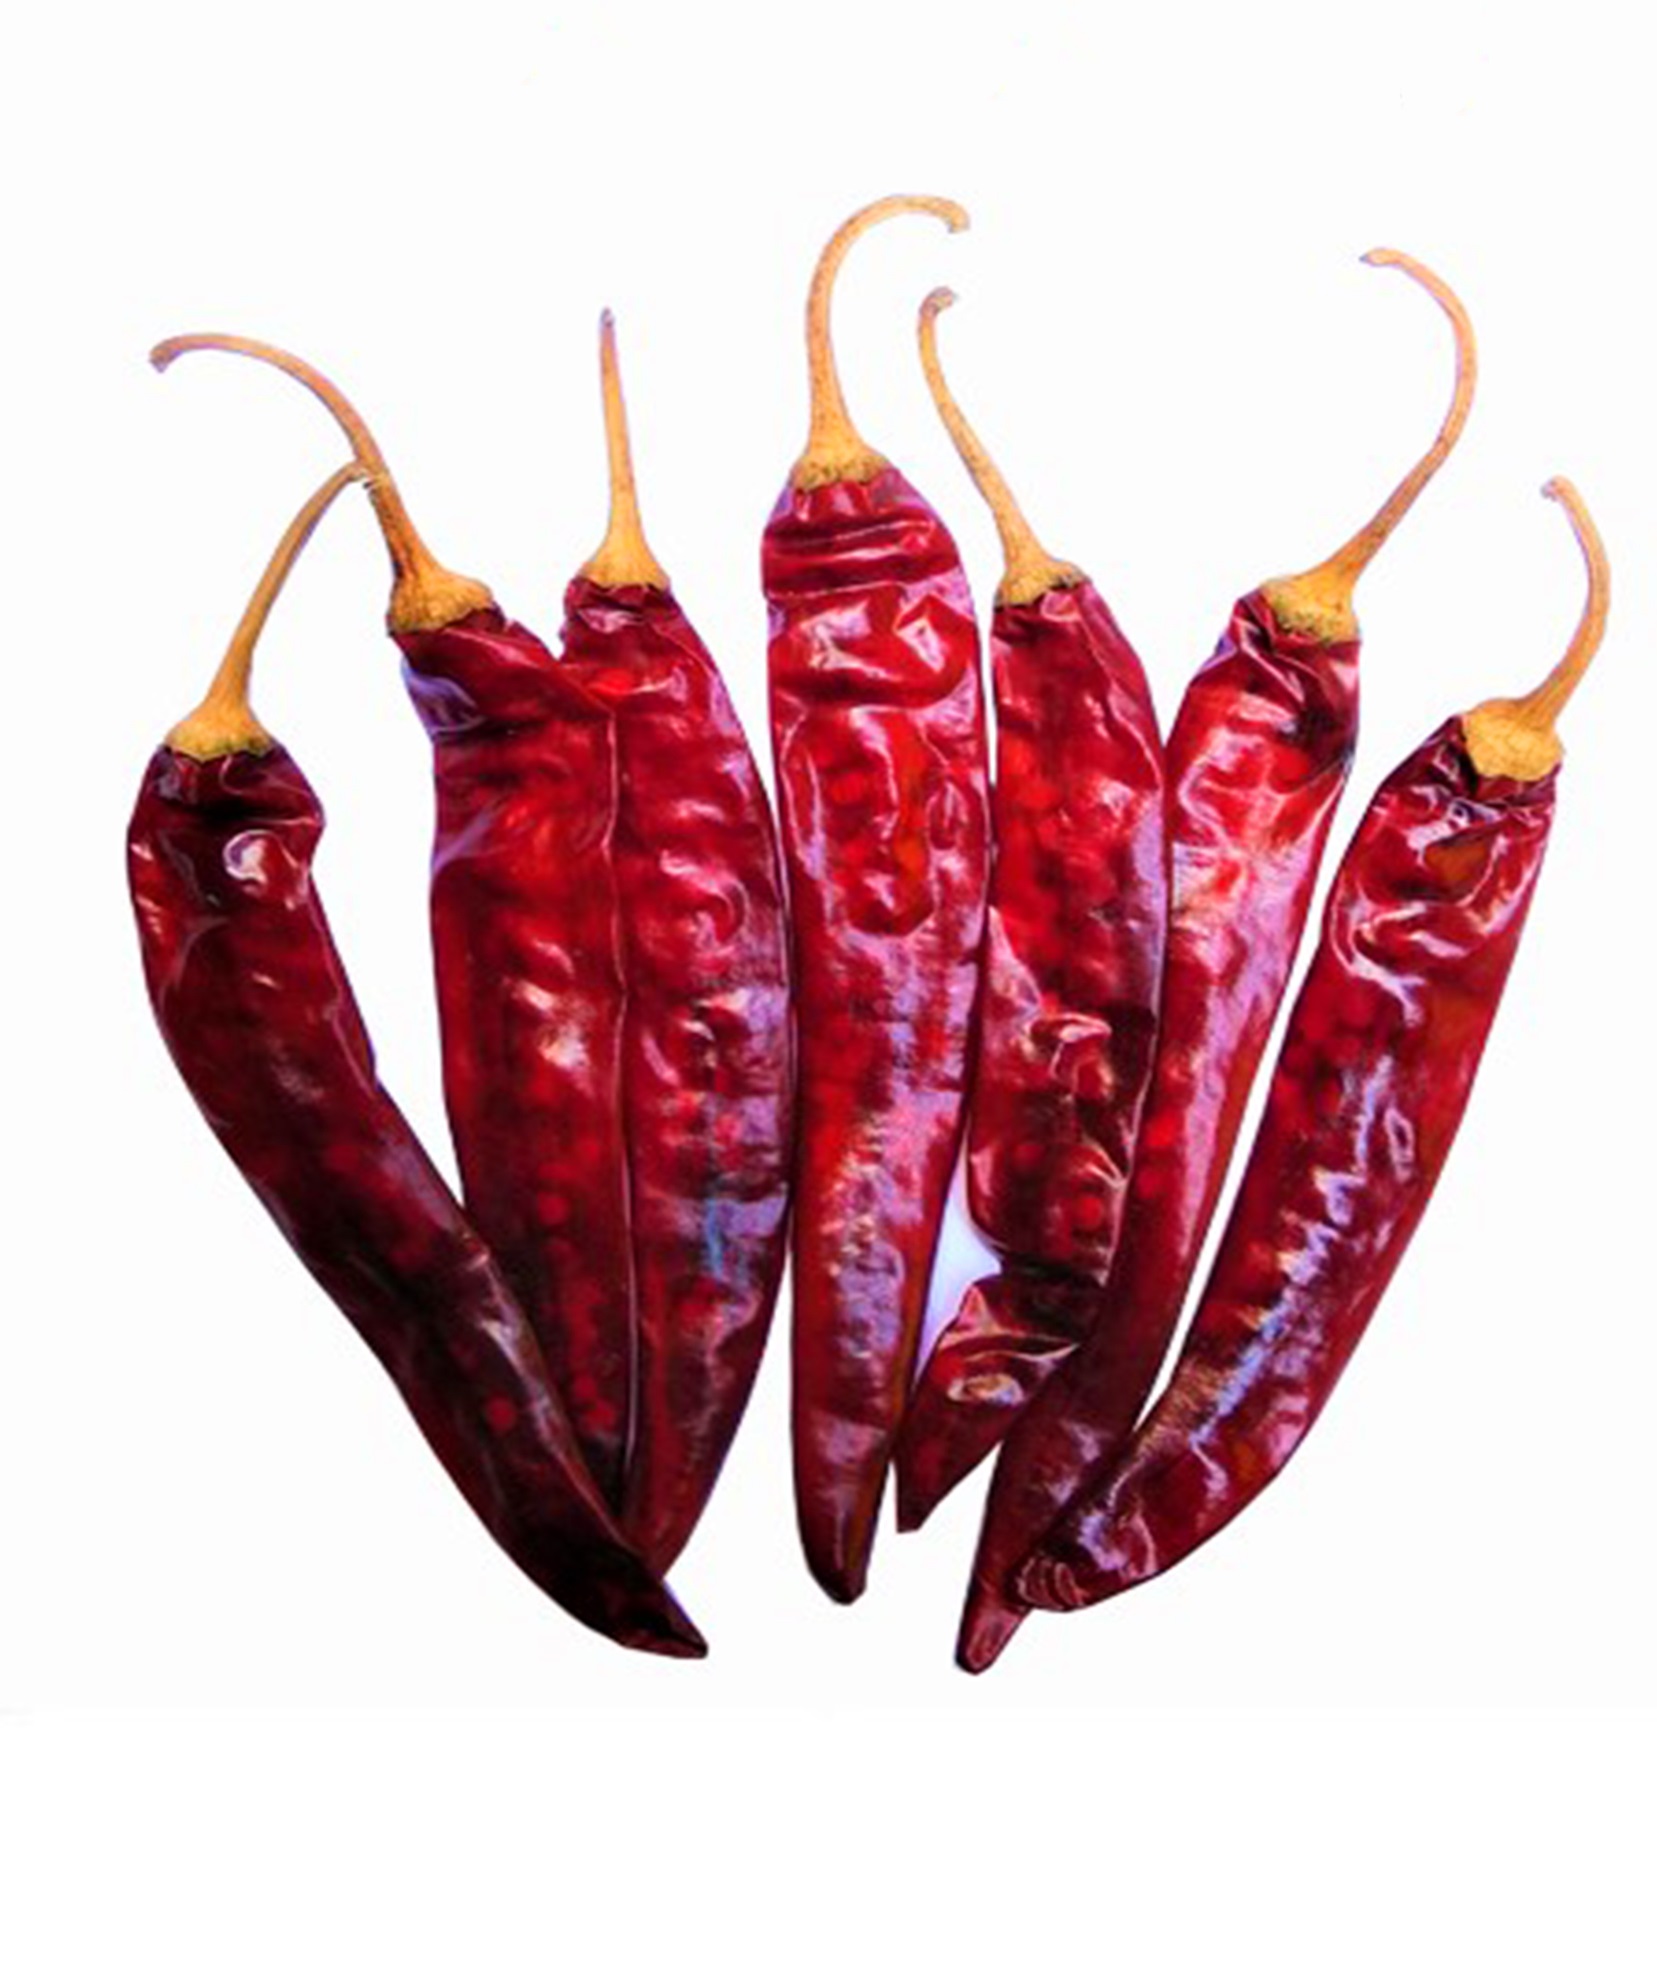 Top selling organic dry red chilli pepper available in bulk quantity Spices Herbs from best quality exporters